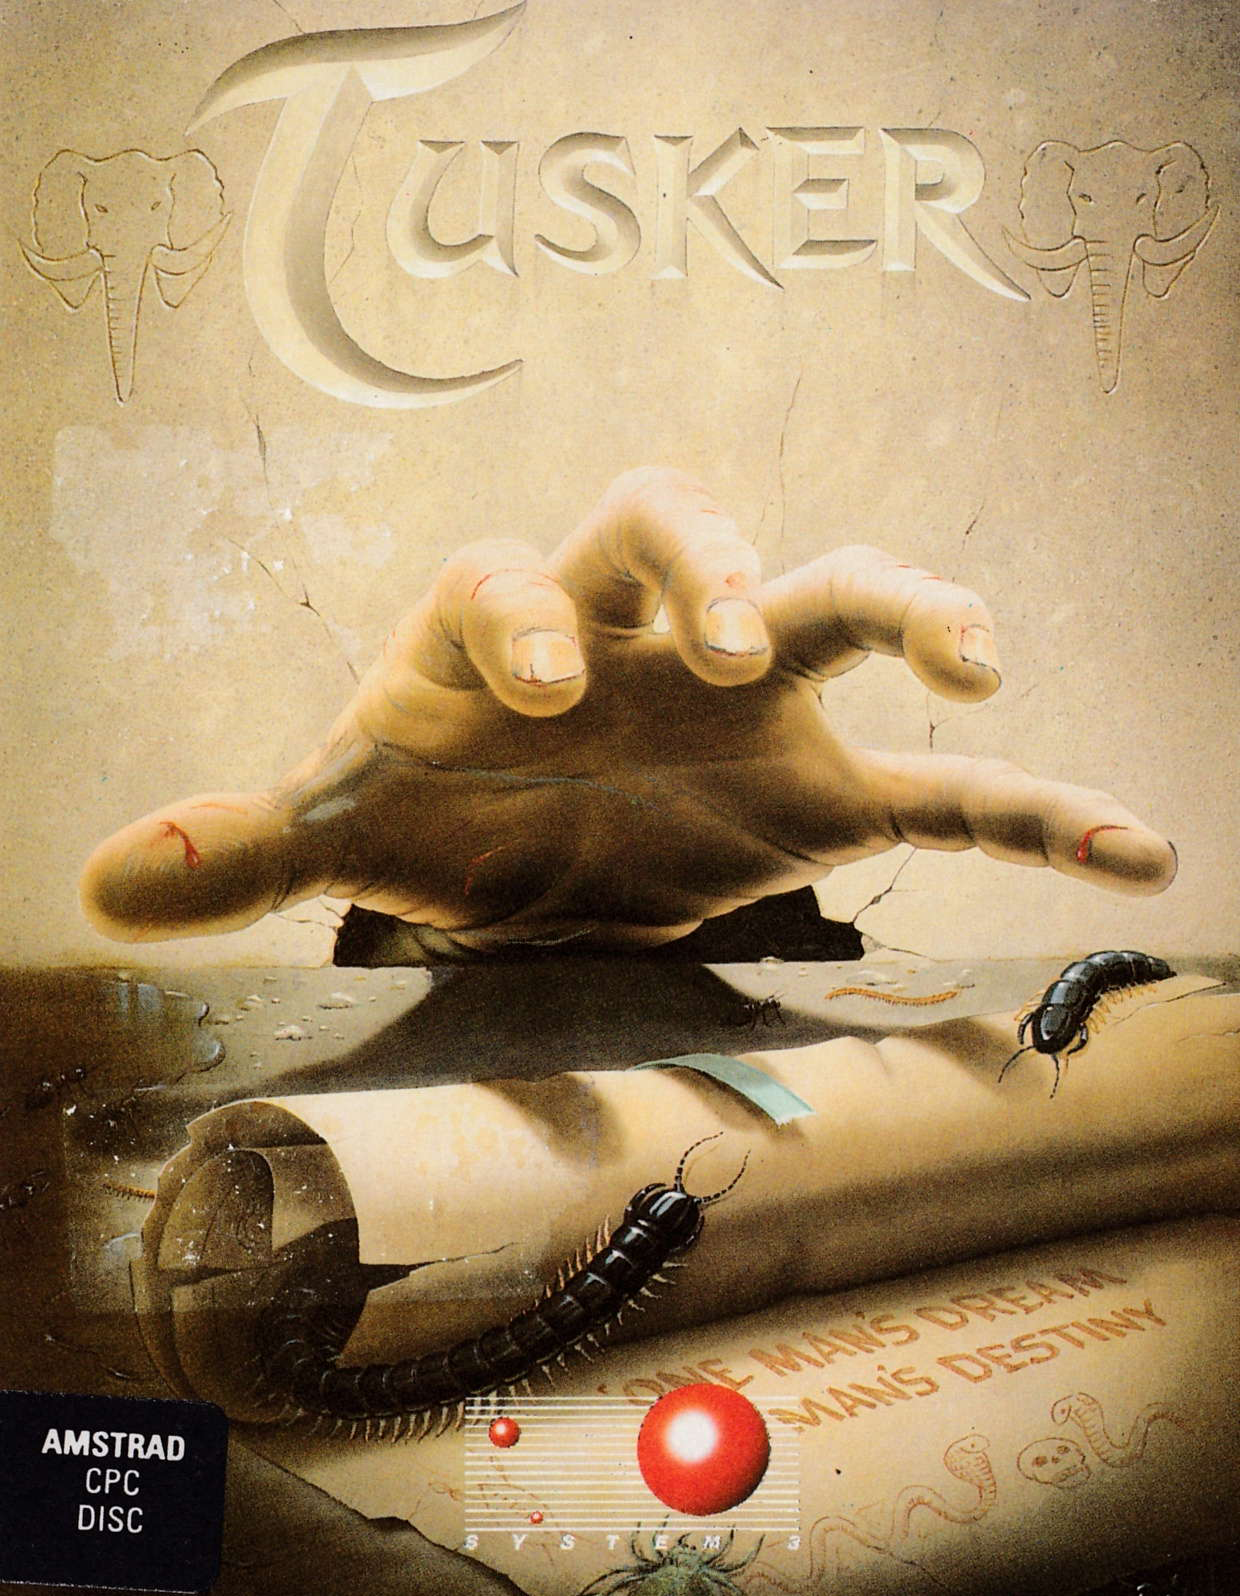 cover of the Amstrad CPC game Tusker  by GameBase CPC